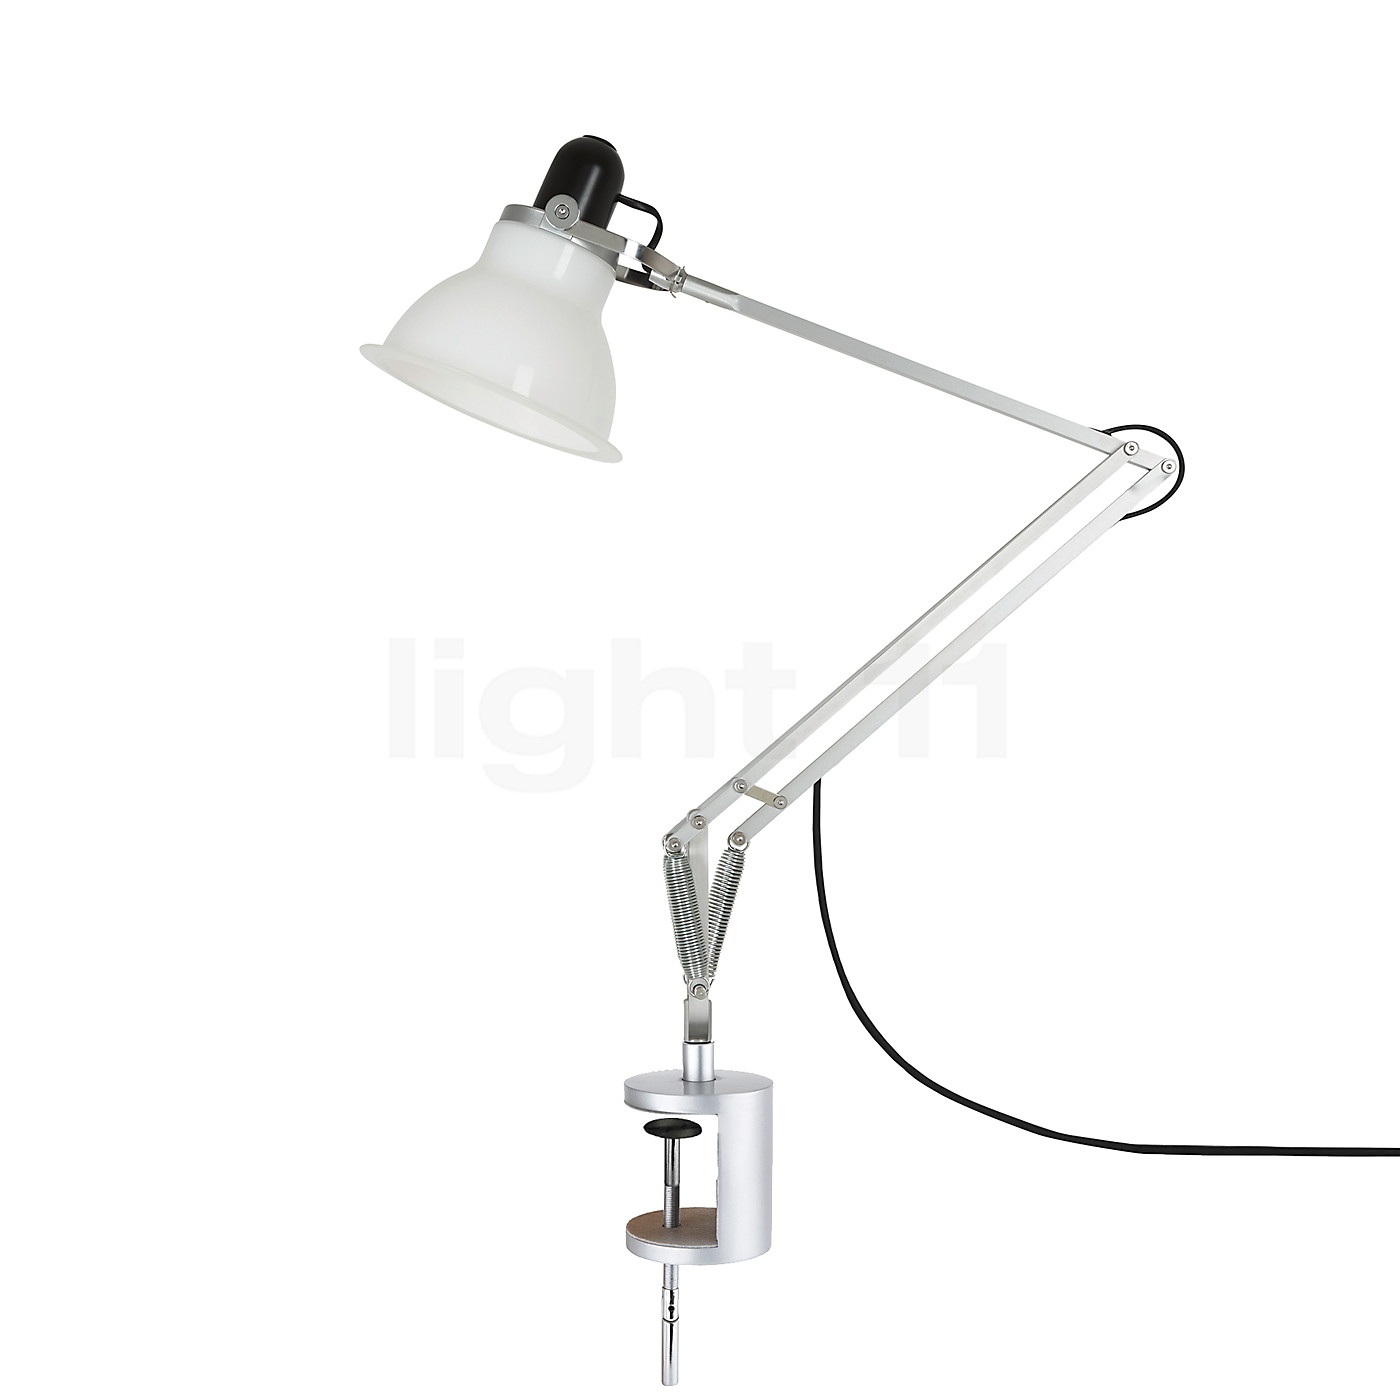 Anglepoise_Type_1228_Desk_Lamp_with_Clamp  aedc22c7f684691f6eecb3859f7a4257